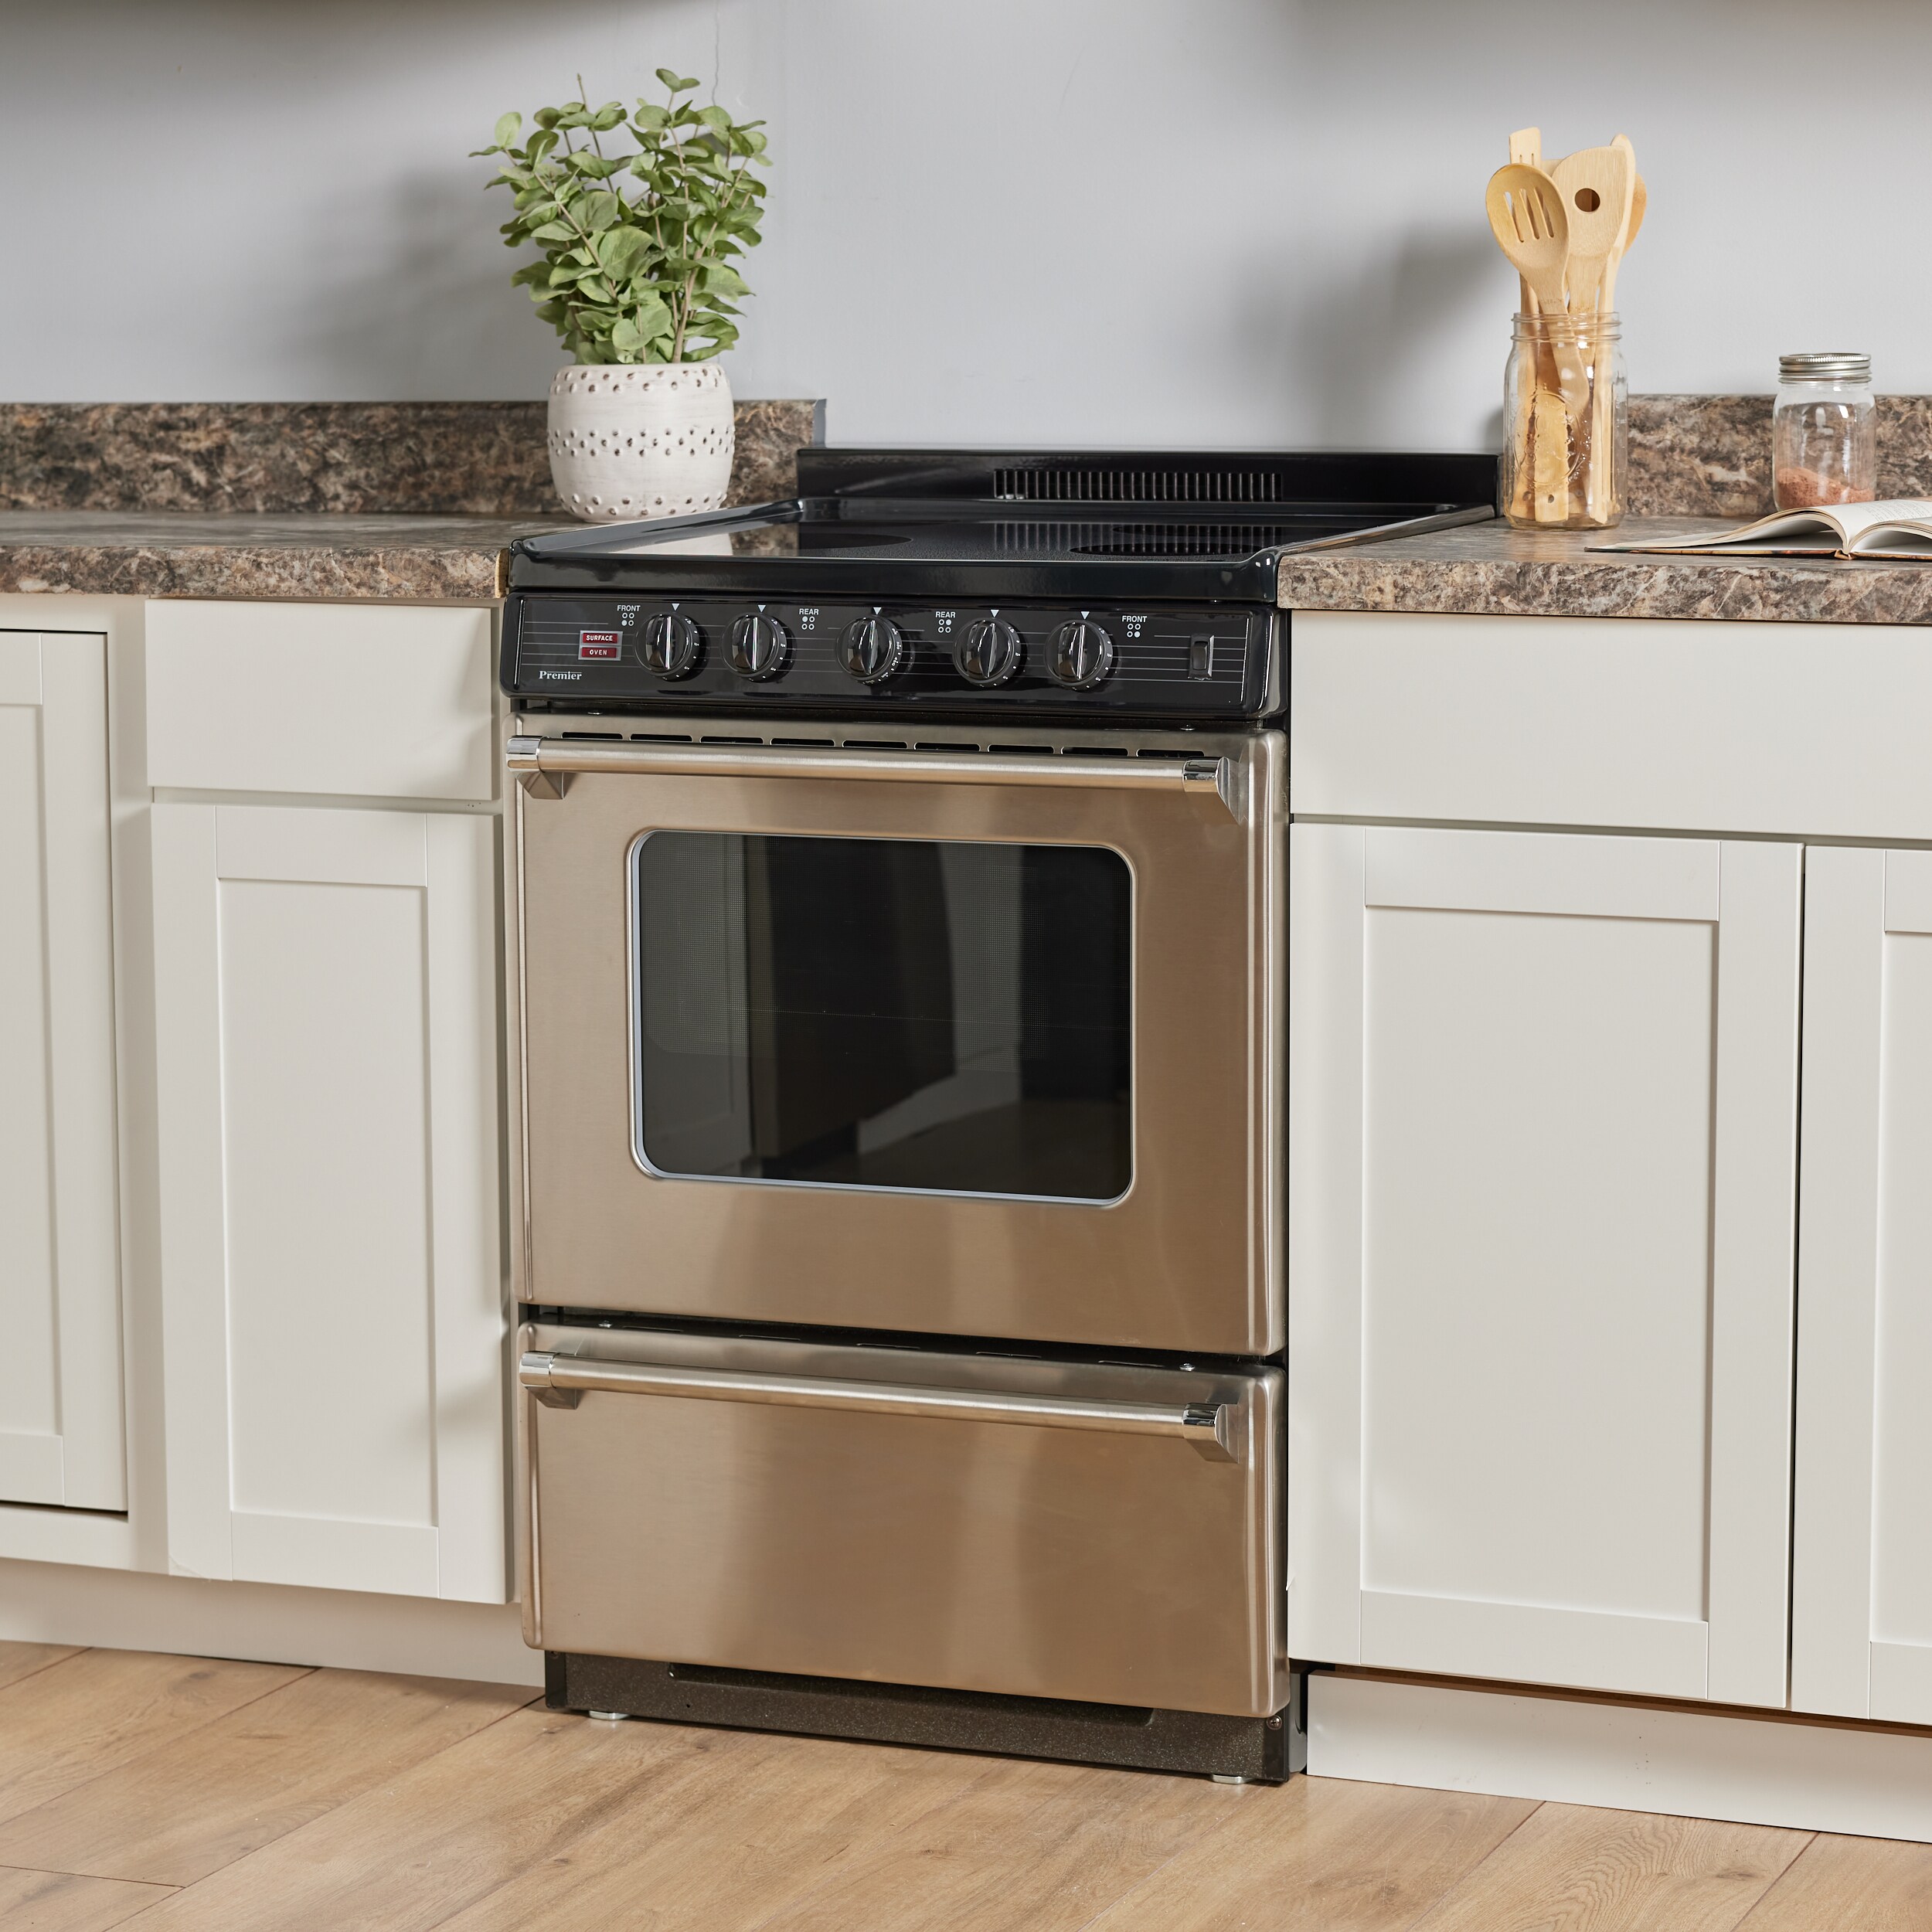 ECS7X0BP by Premier - 24 in. Freestanding Smooth Top Electric Range in  Stainless Steel